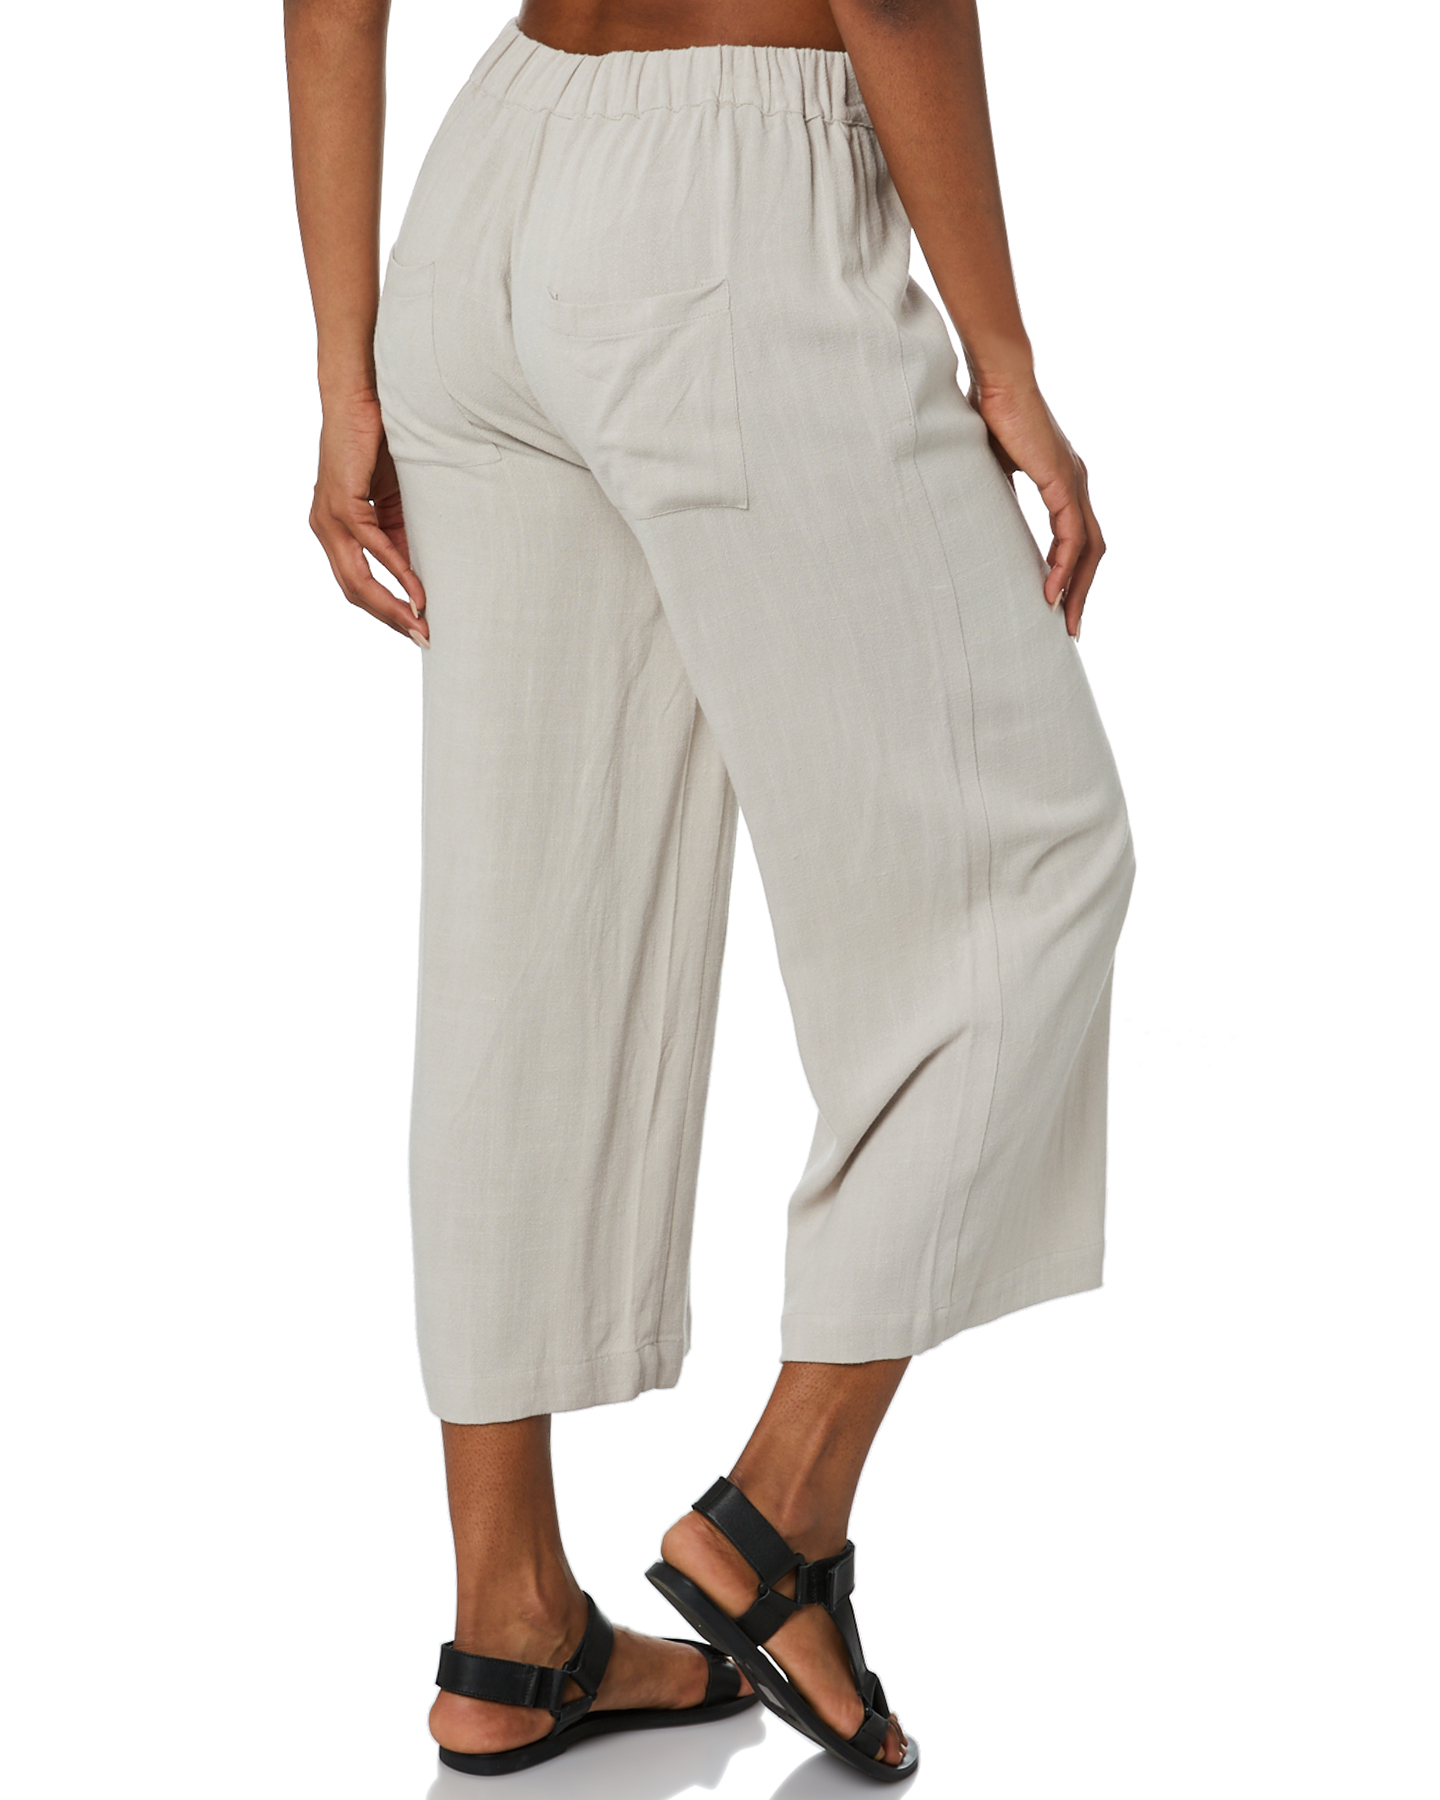 Swell Sundrenched Beach Pant - Stone | SurfStitch